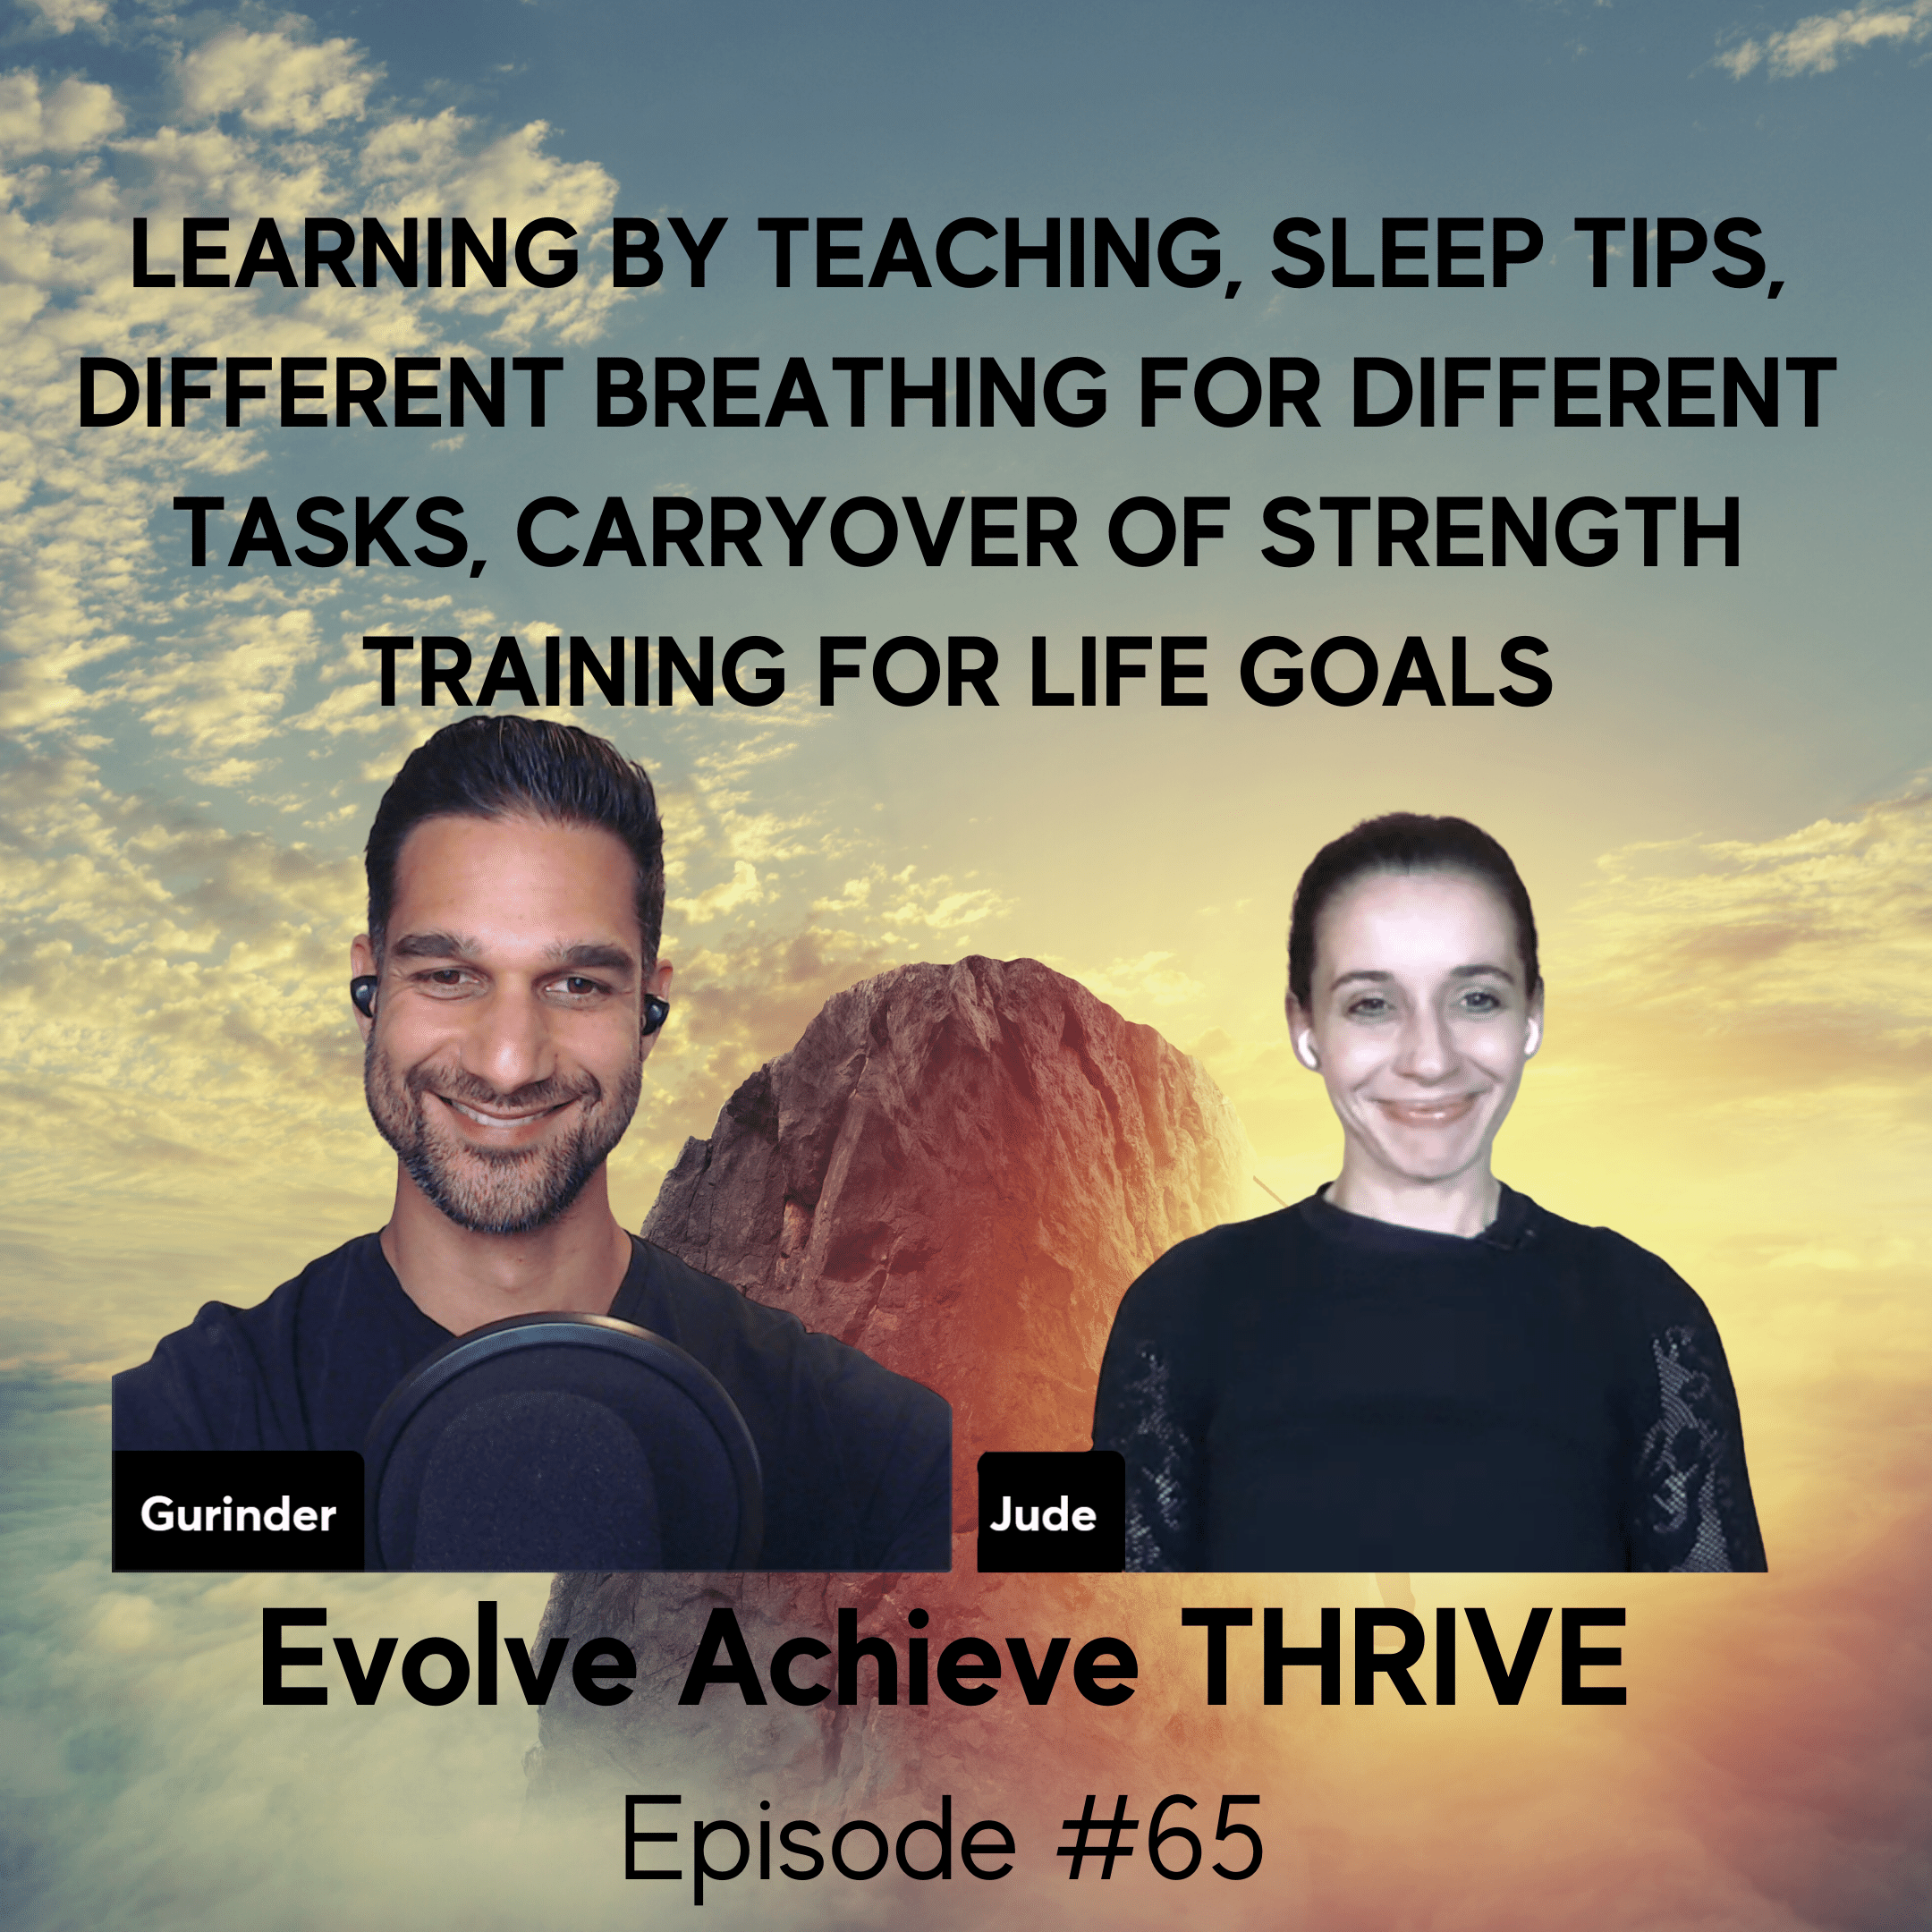 #65 Learning by Teaching, Sleep Tips, Different Types of Breathing for Different Tasks, Carryover of Strength Training for Life Goals